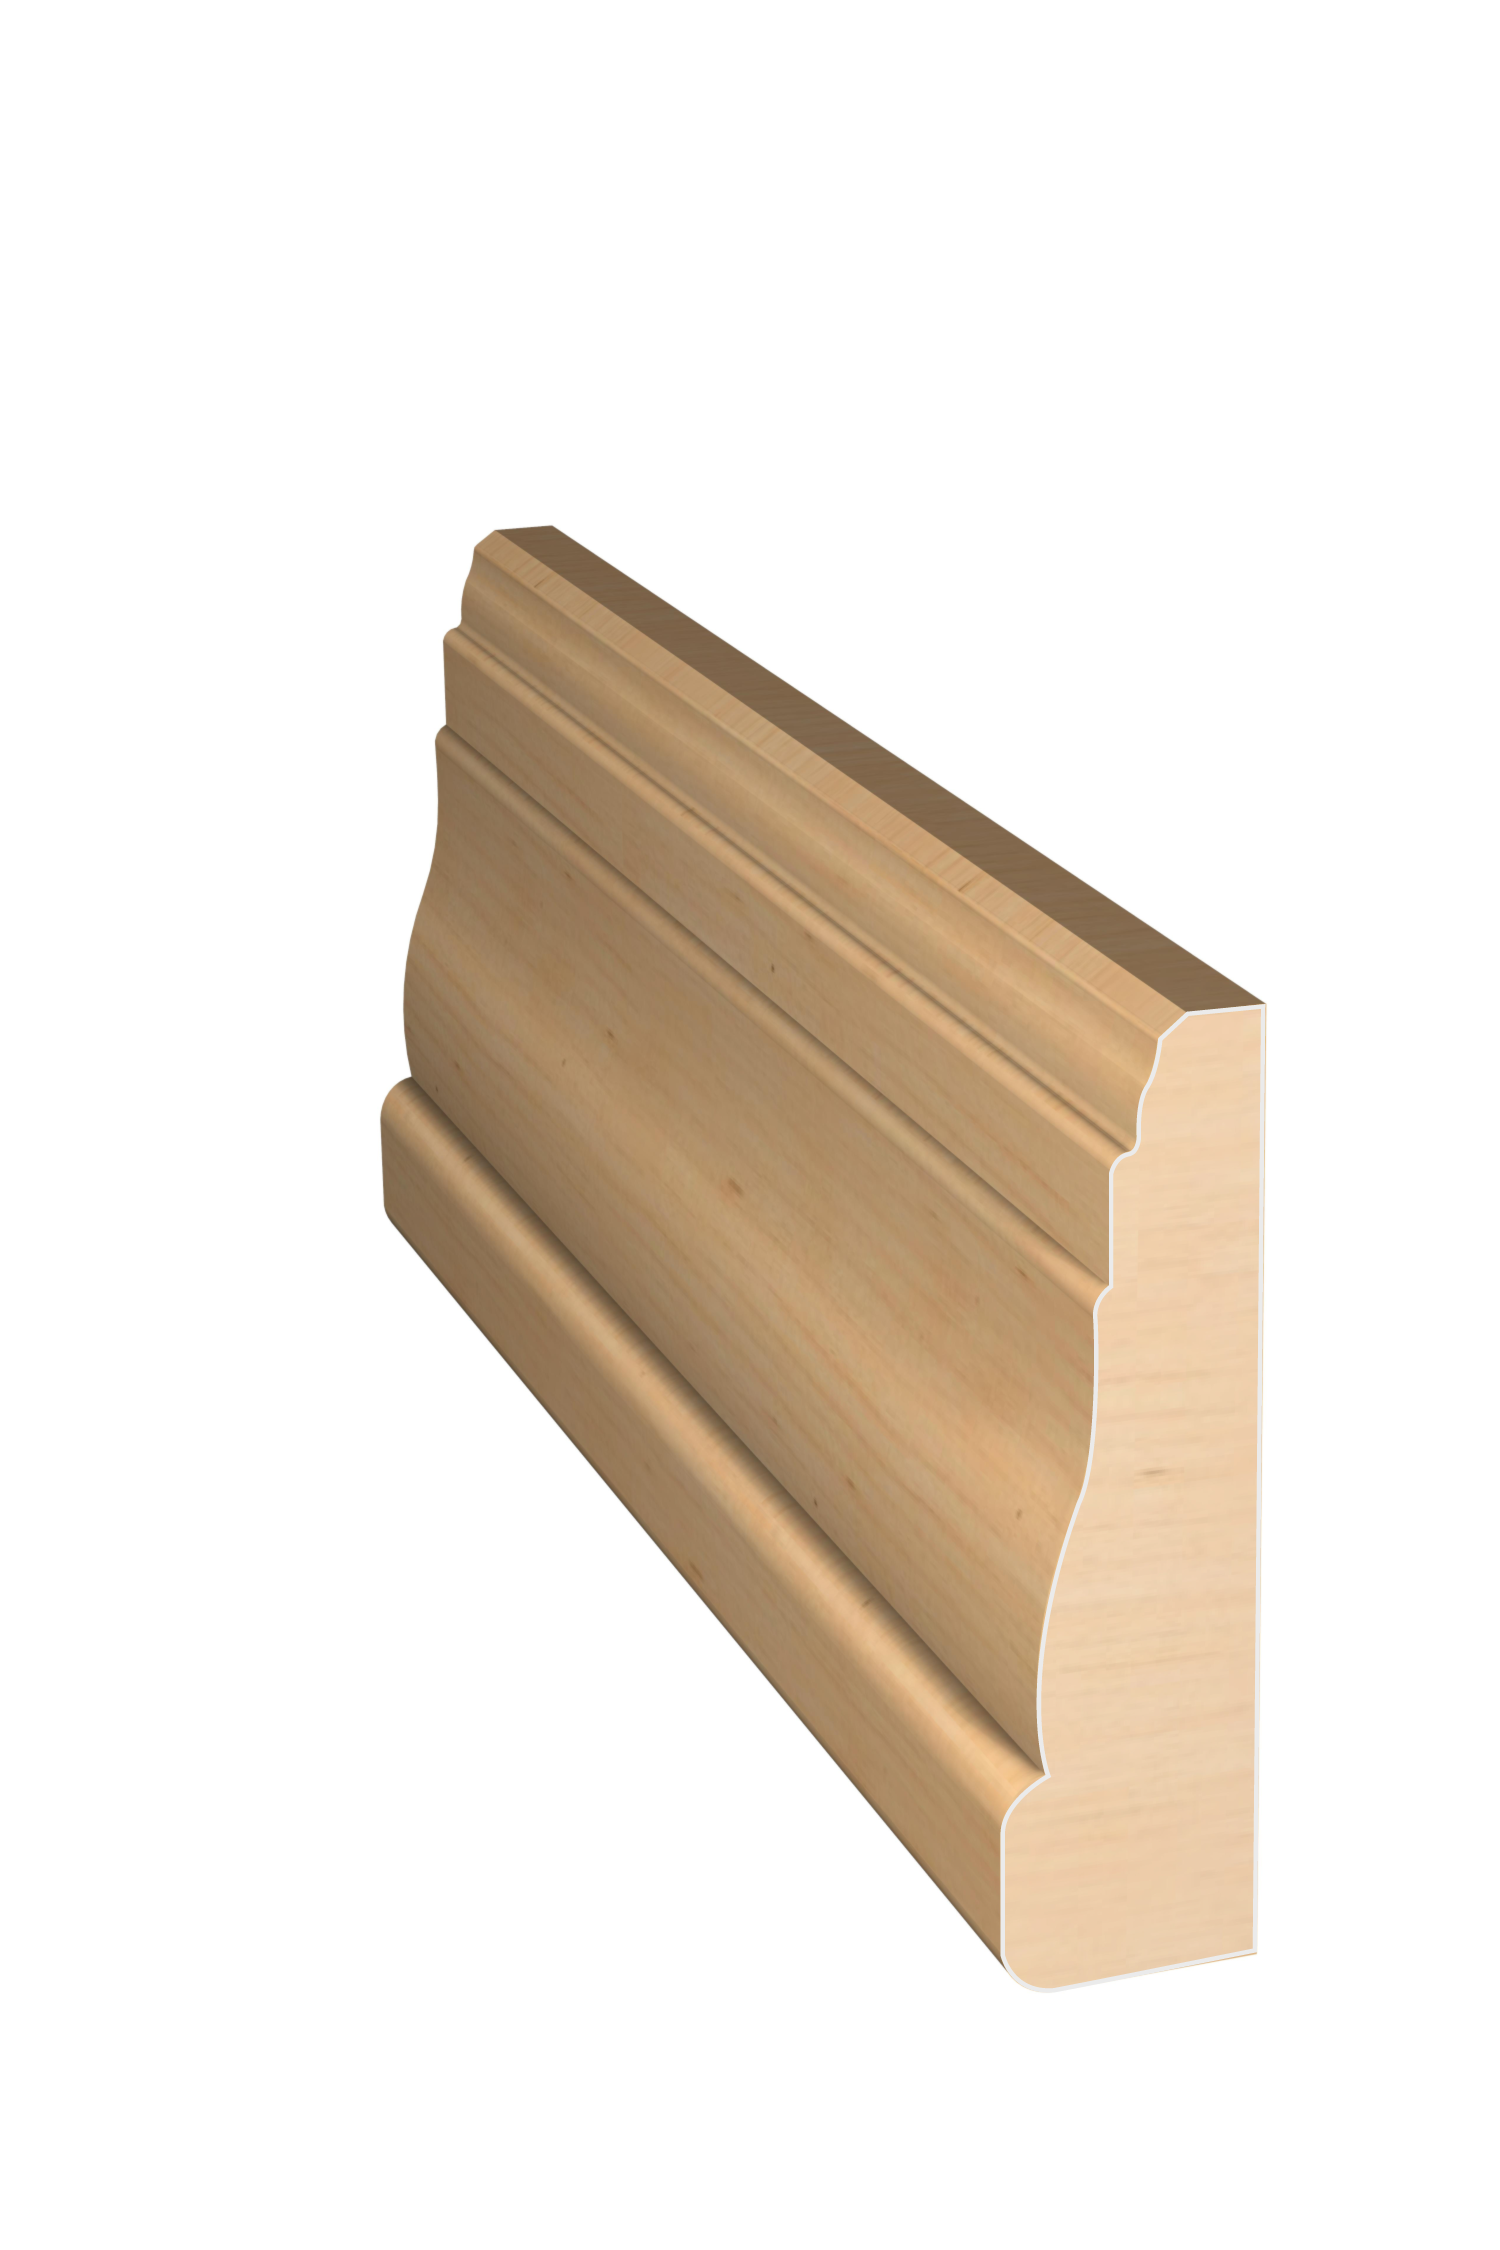 Three dimensional rendering of custom casing wood molding CAPL21224 made by Public Lumber Company in Detroit.